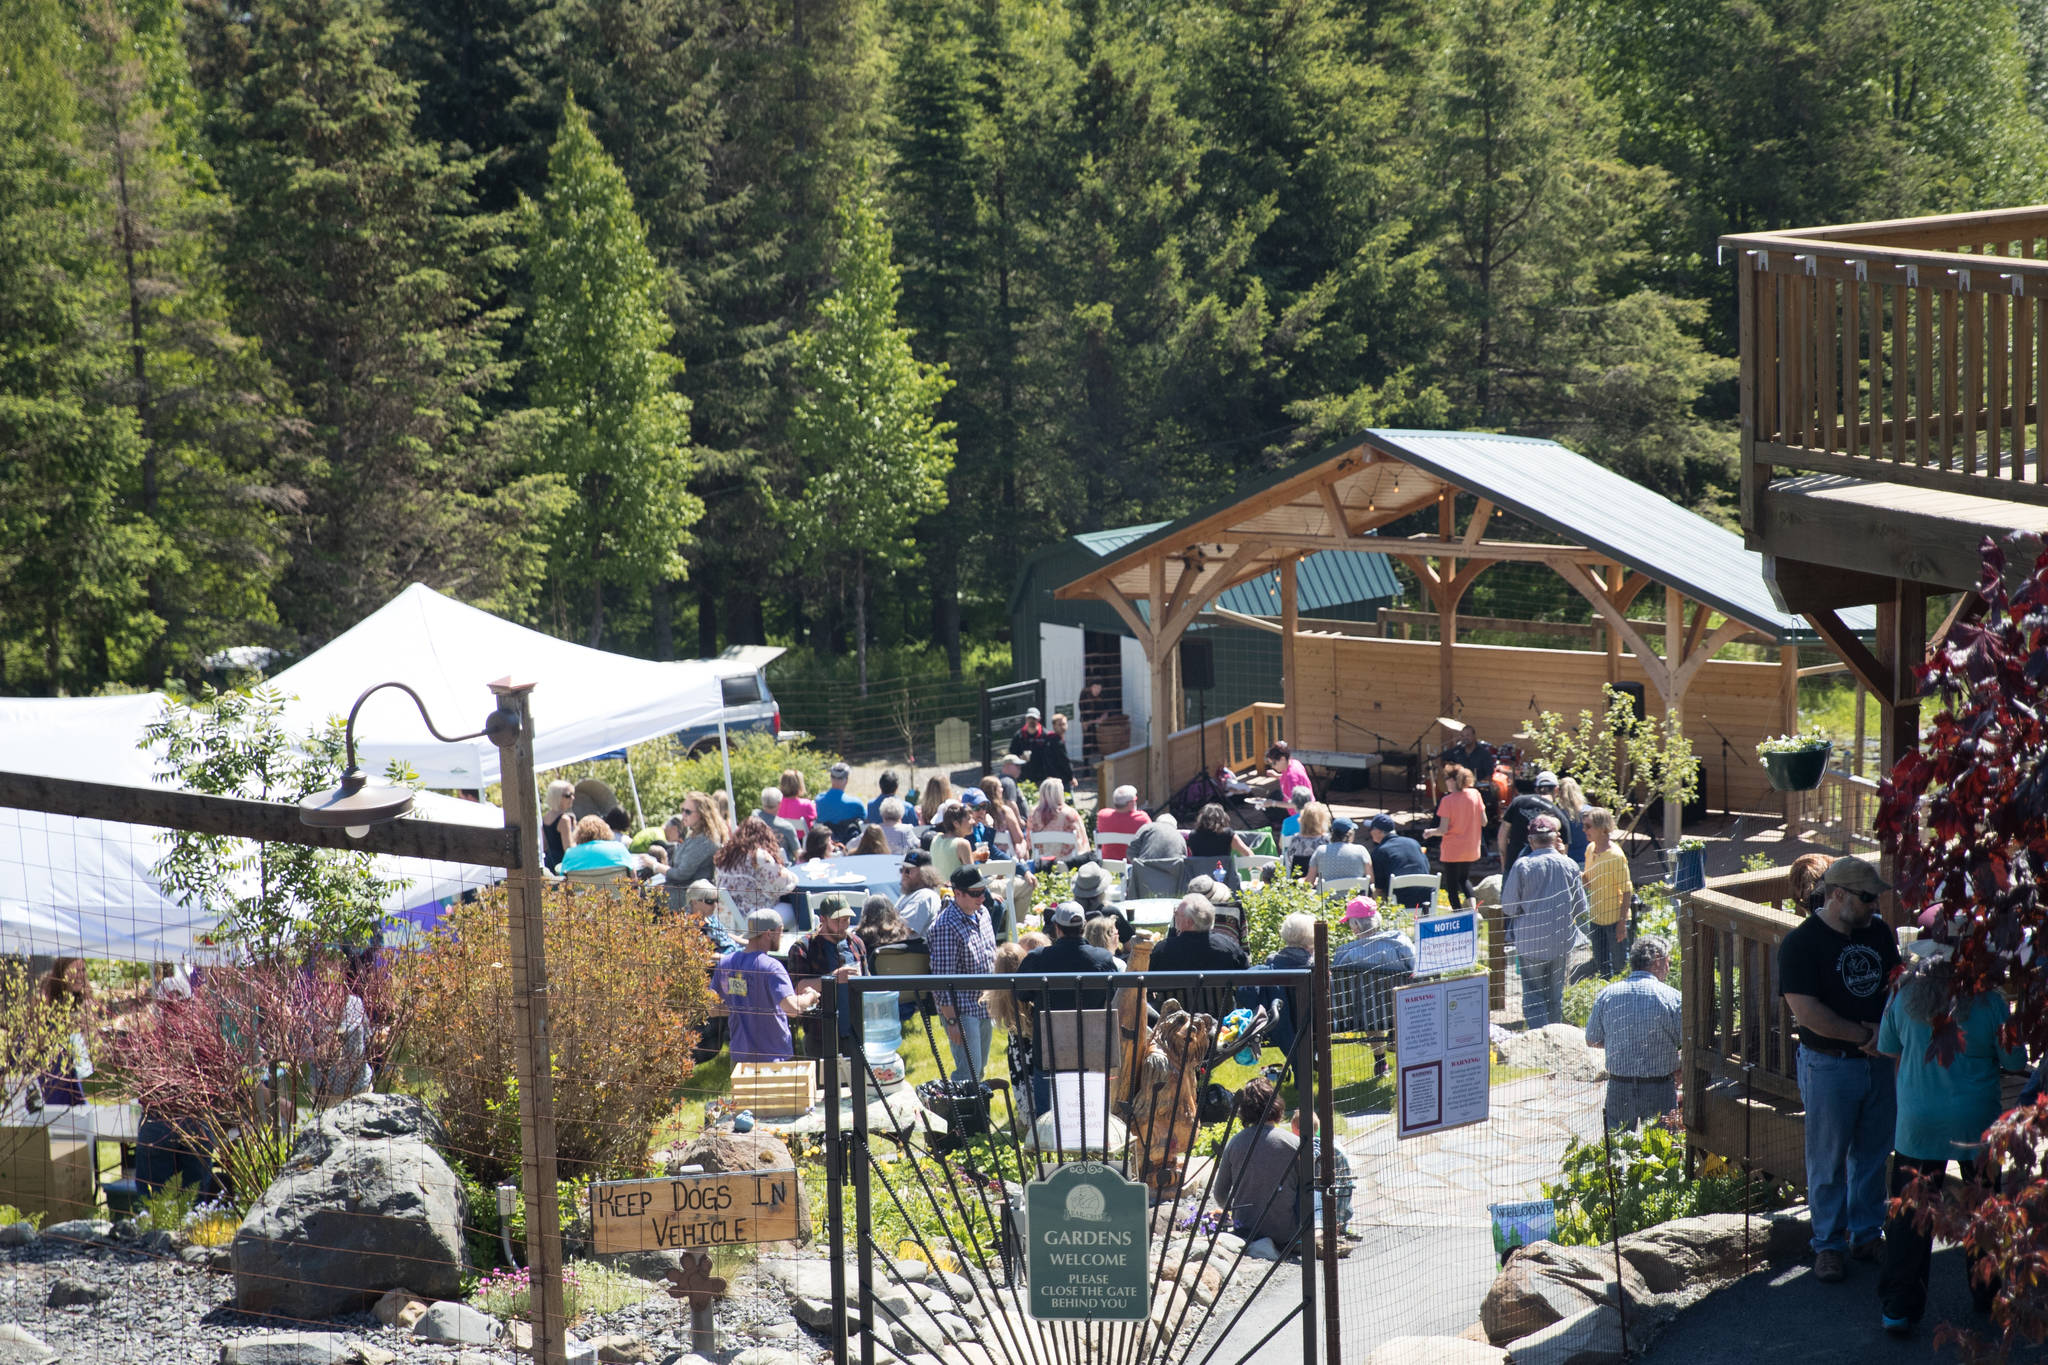 In this photo taken June 9, 2018, the music festival sponsored by Bear Creek Winery and Lodging makes the most of the surrounding landscaping at its location in Kachemak City, Alaska. This year’s festival will be held June 1. Price of the ticket includes two beverages. Proceeds from ticket sales and a live auction benefit the Nikki Geragotelis (Fry) Memorial Scholarship, in memory of Bill and Dorothy Fry’s daughter, Nikki, who diesdin 2013. (Photo courtesy of Bear Creek Winery)